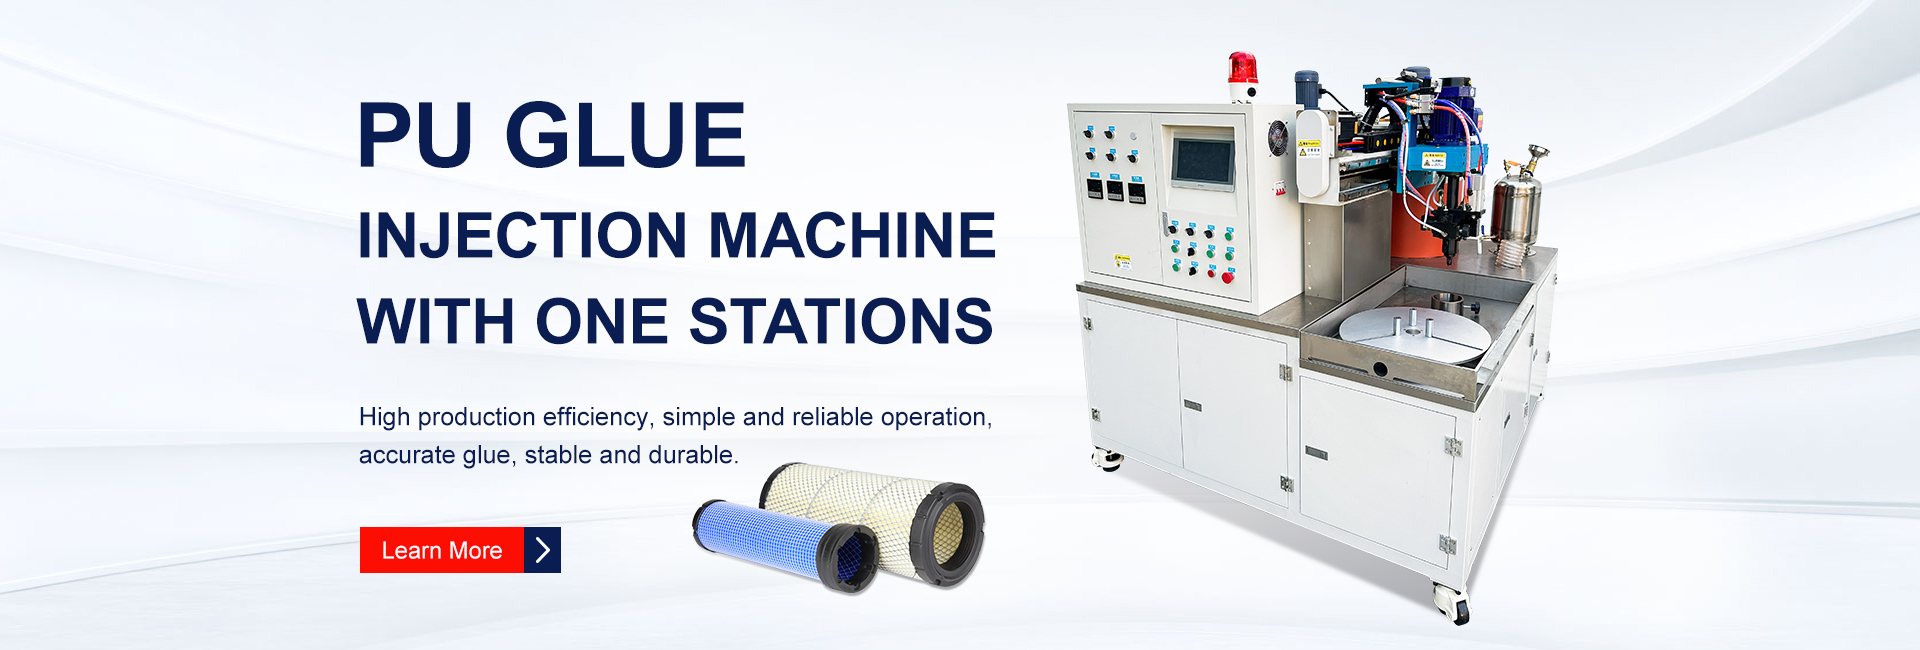 https://www.hbjrfilter.com/pu-glue-injection-machine-with-one-stations-product/